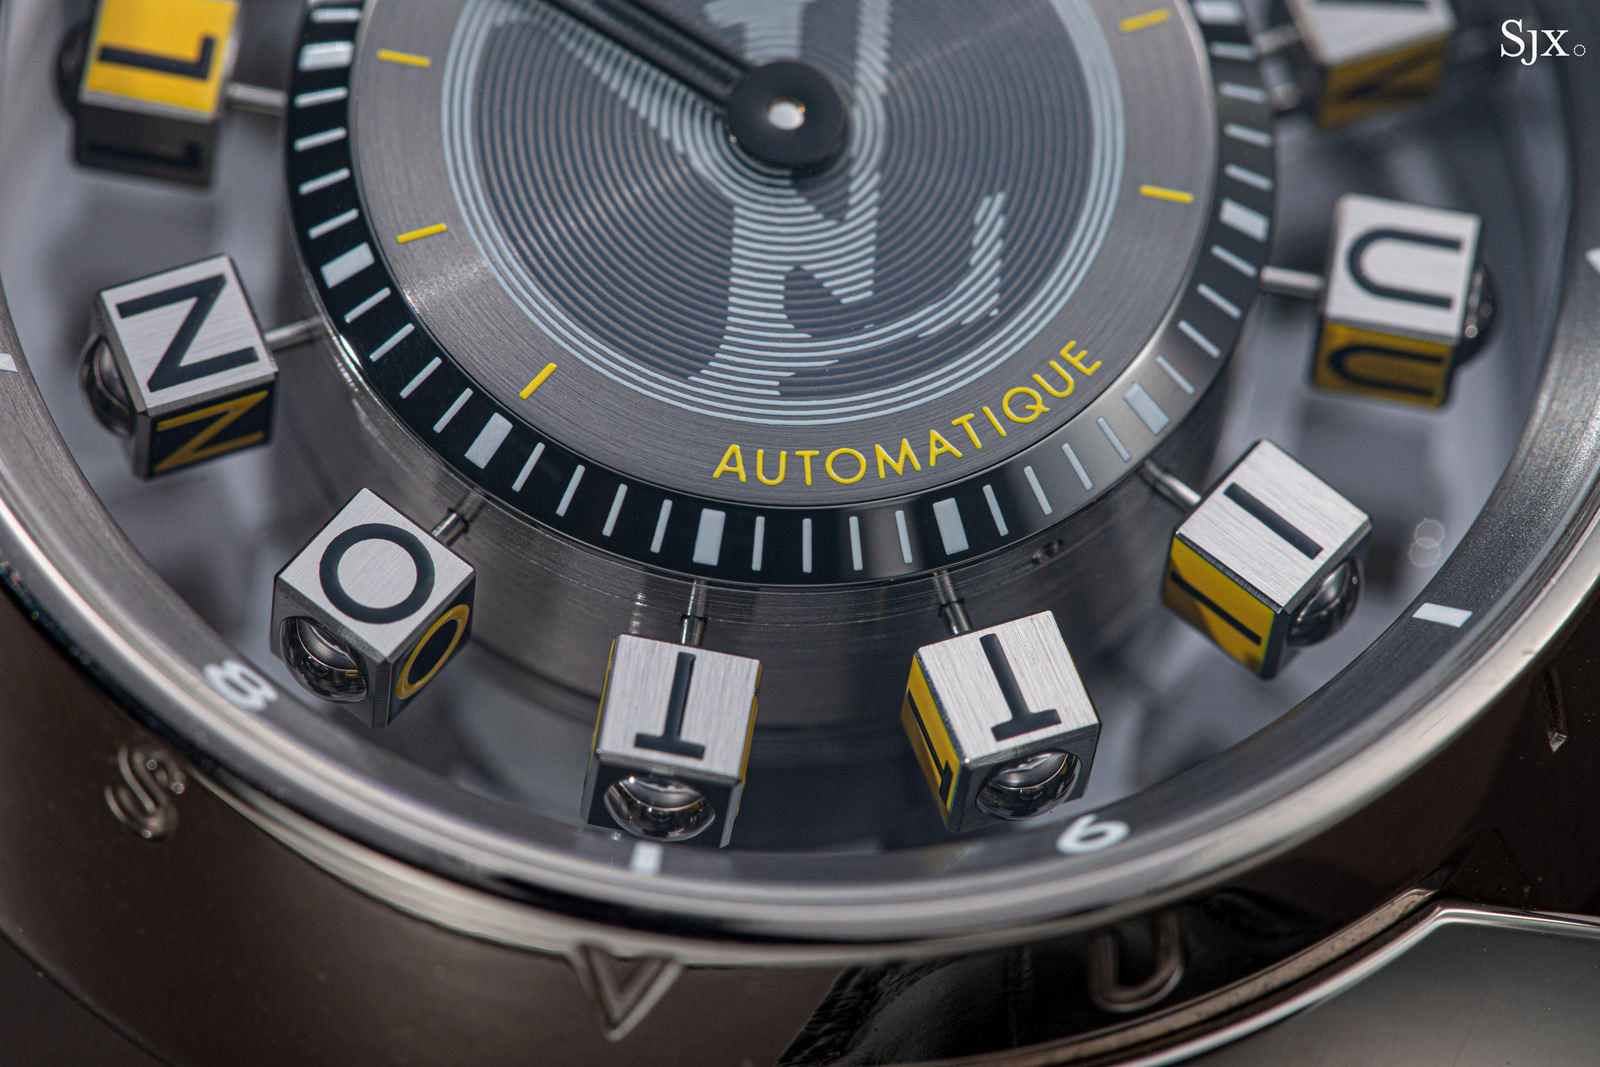 Hands-On: Louis Vuitton Tambour Spin Time Air Quantum